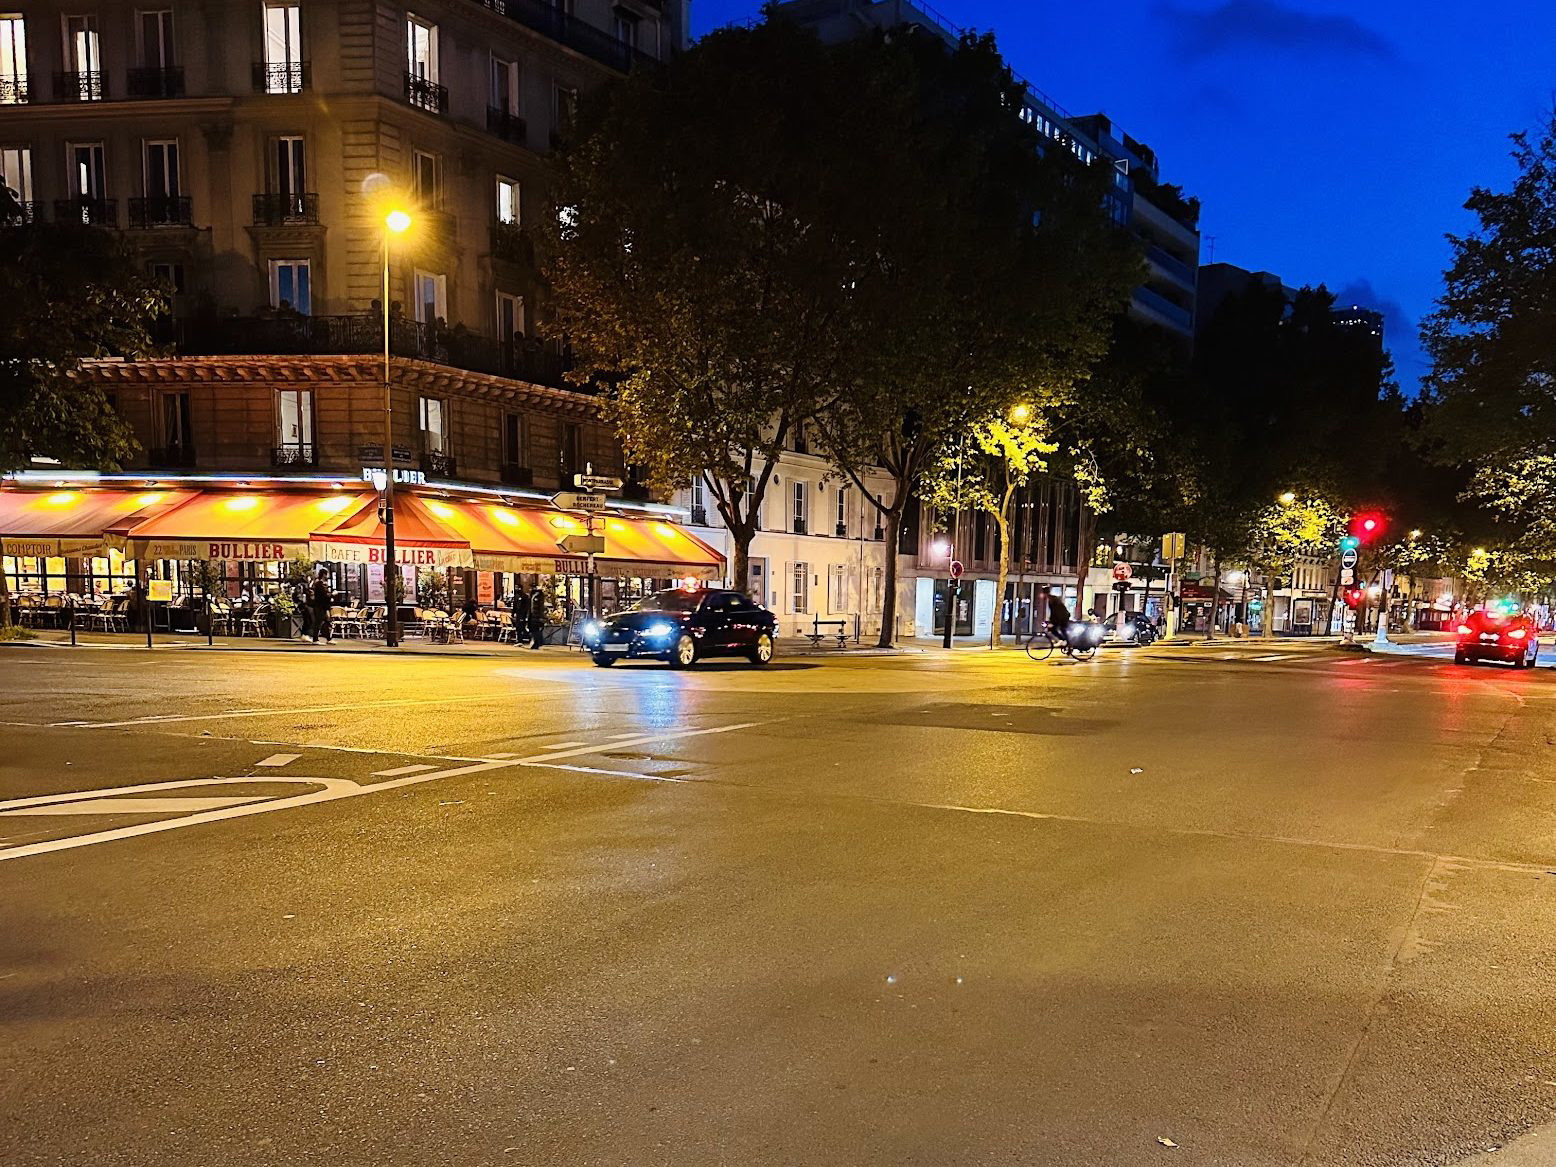 A street in paris for demonstrating ground light pollution